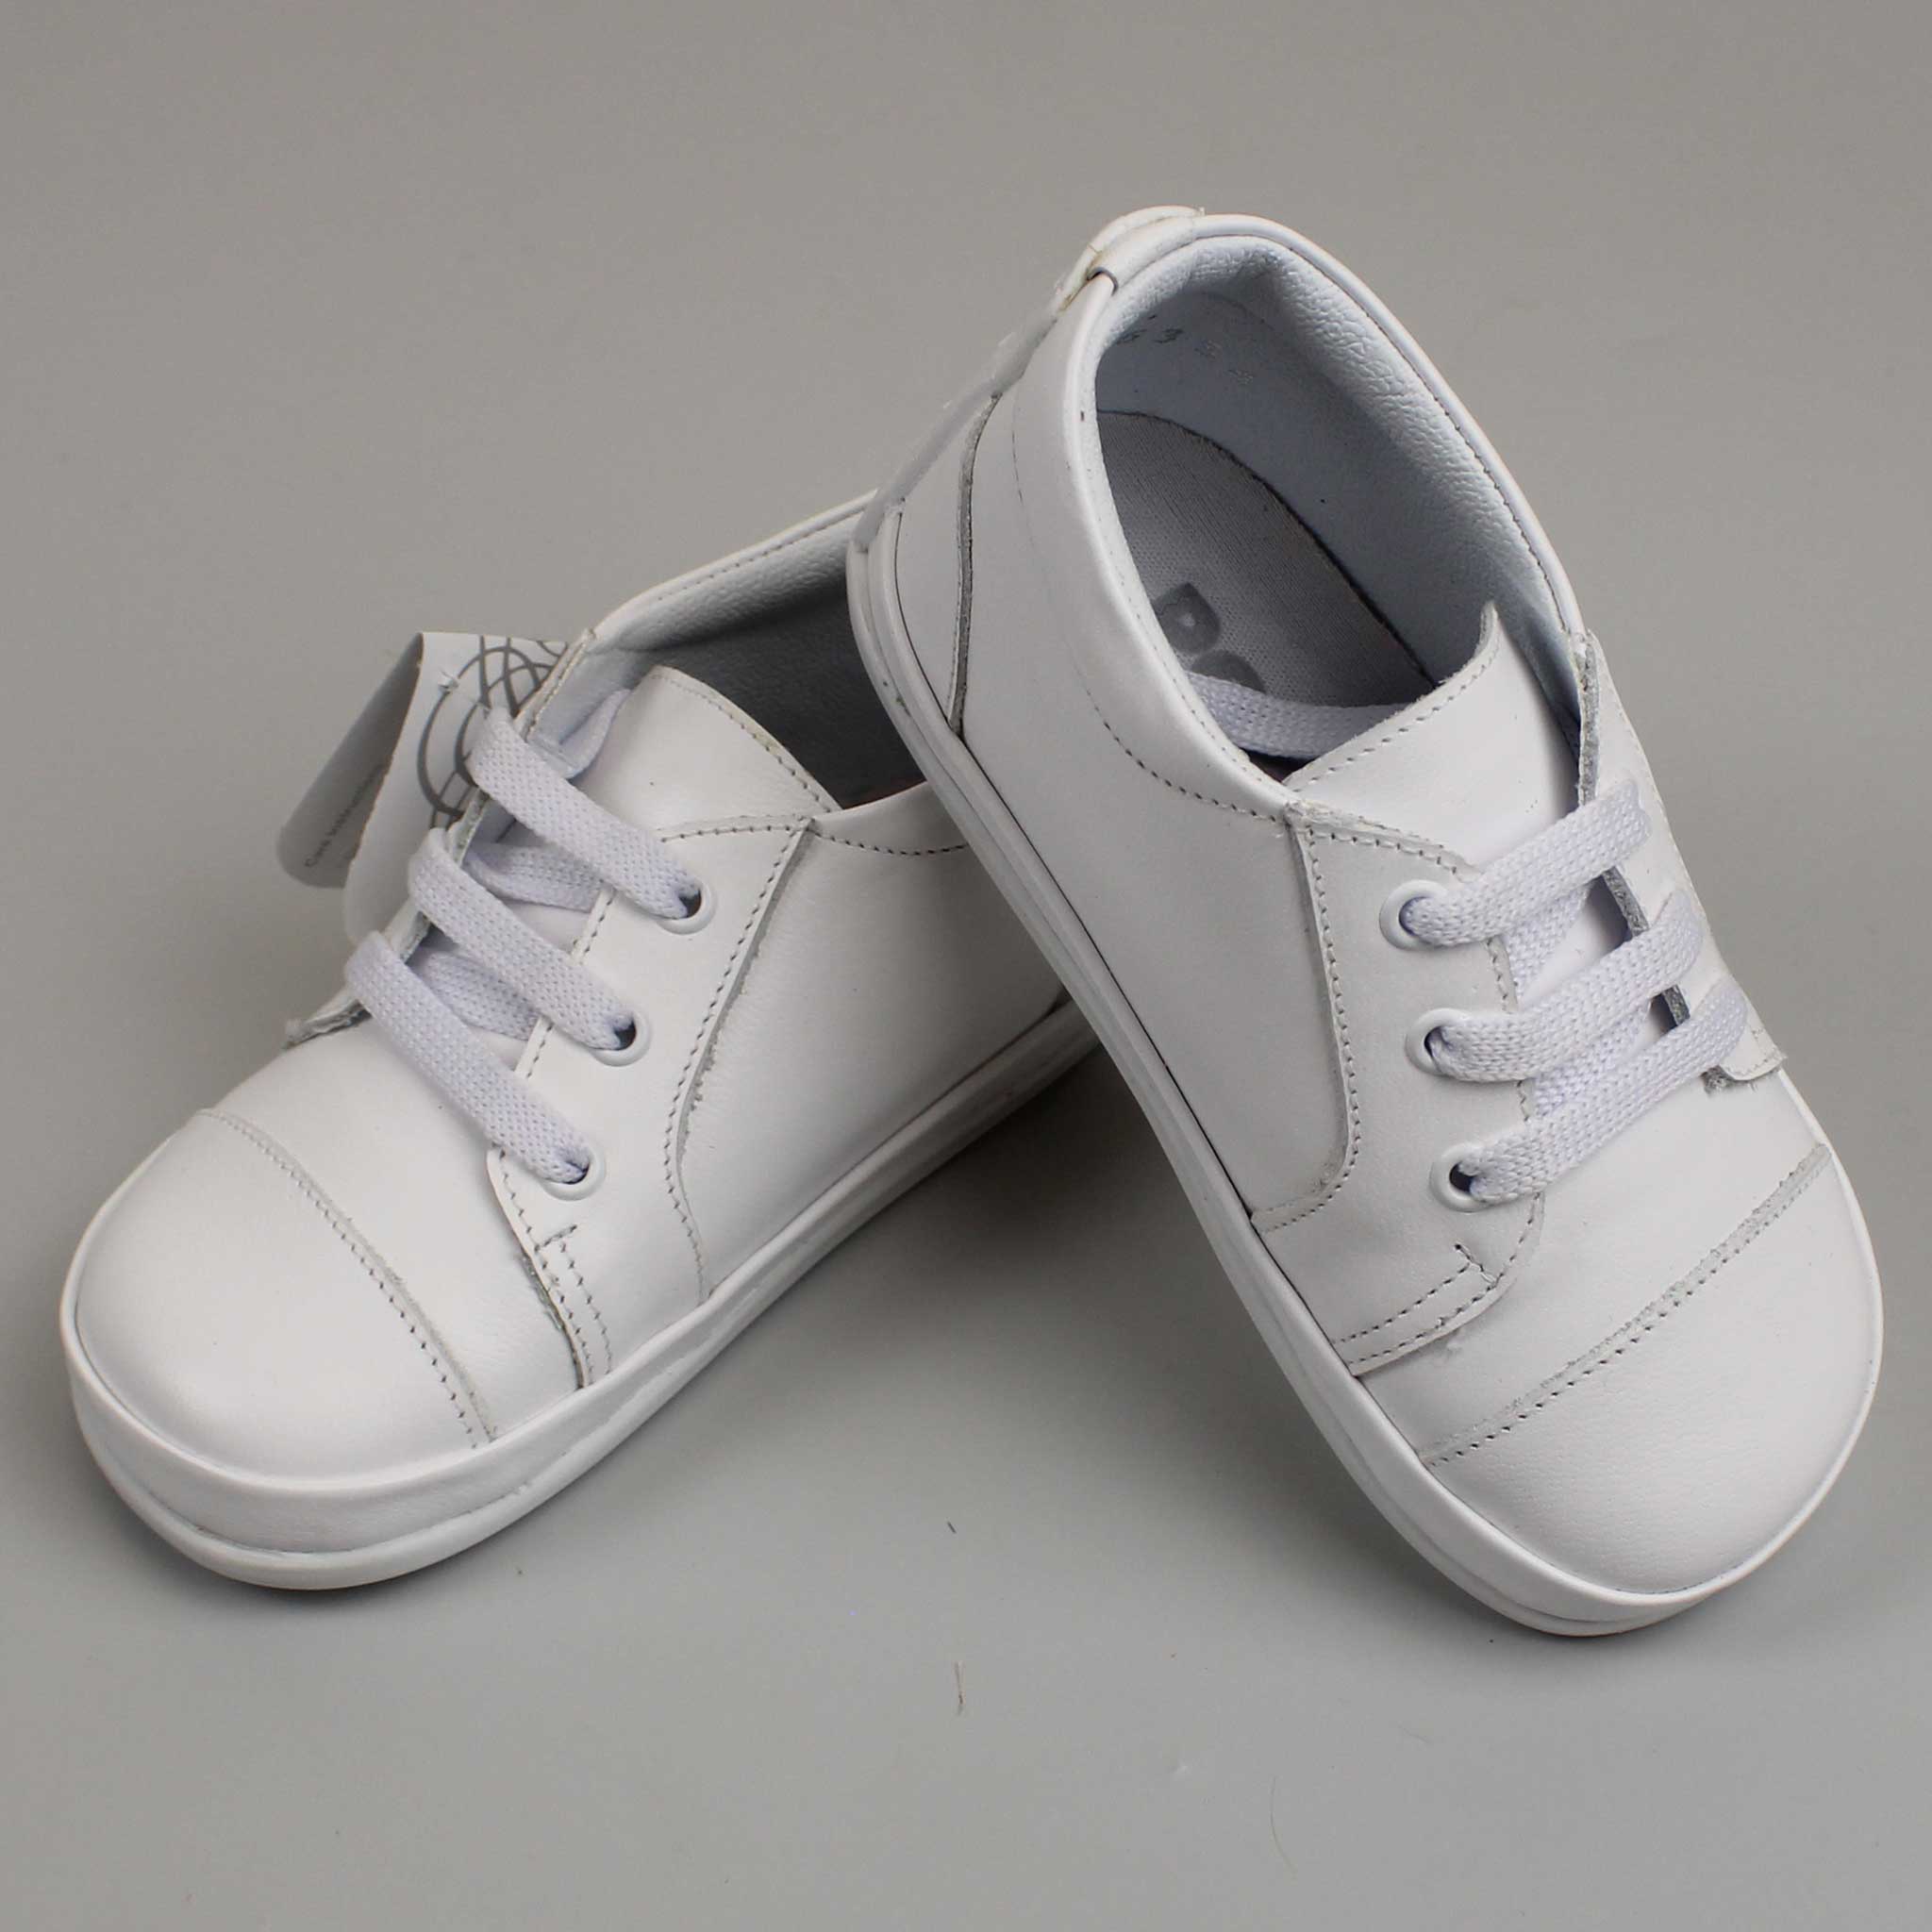 Pex White laced leather shoes